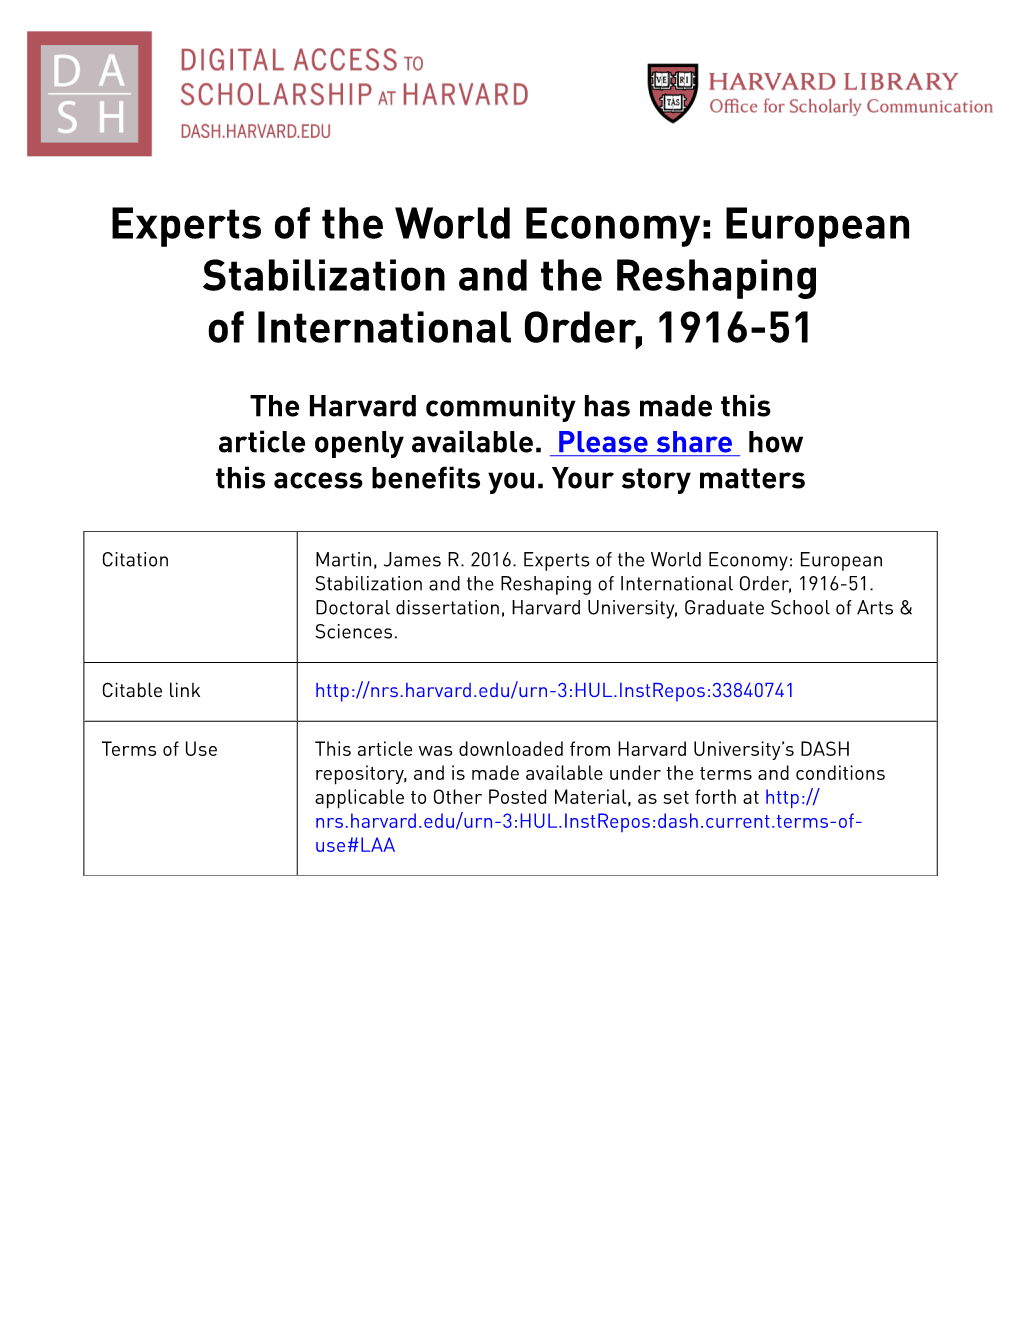 Experts of the World Economy: European Stabilization and the Reshaping of International Order, 1916-51